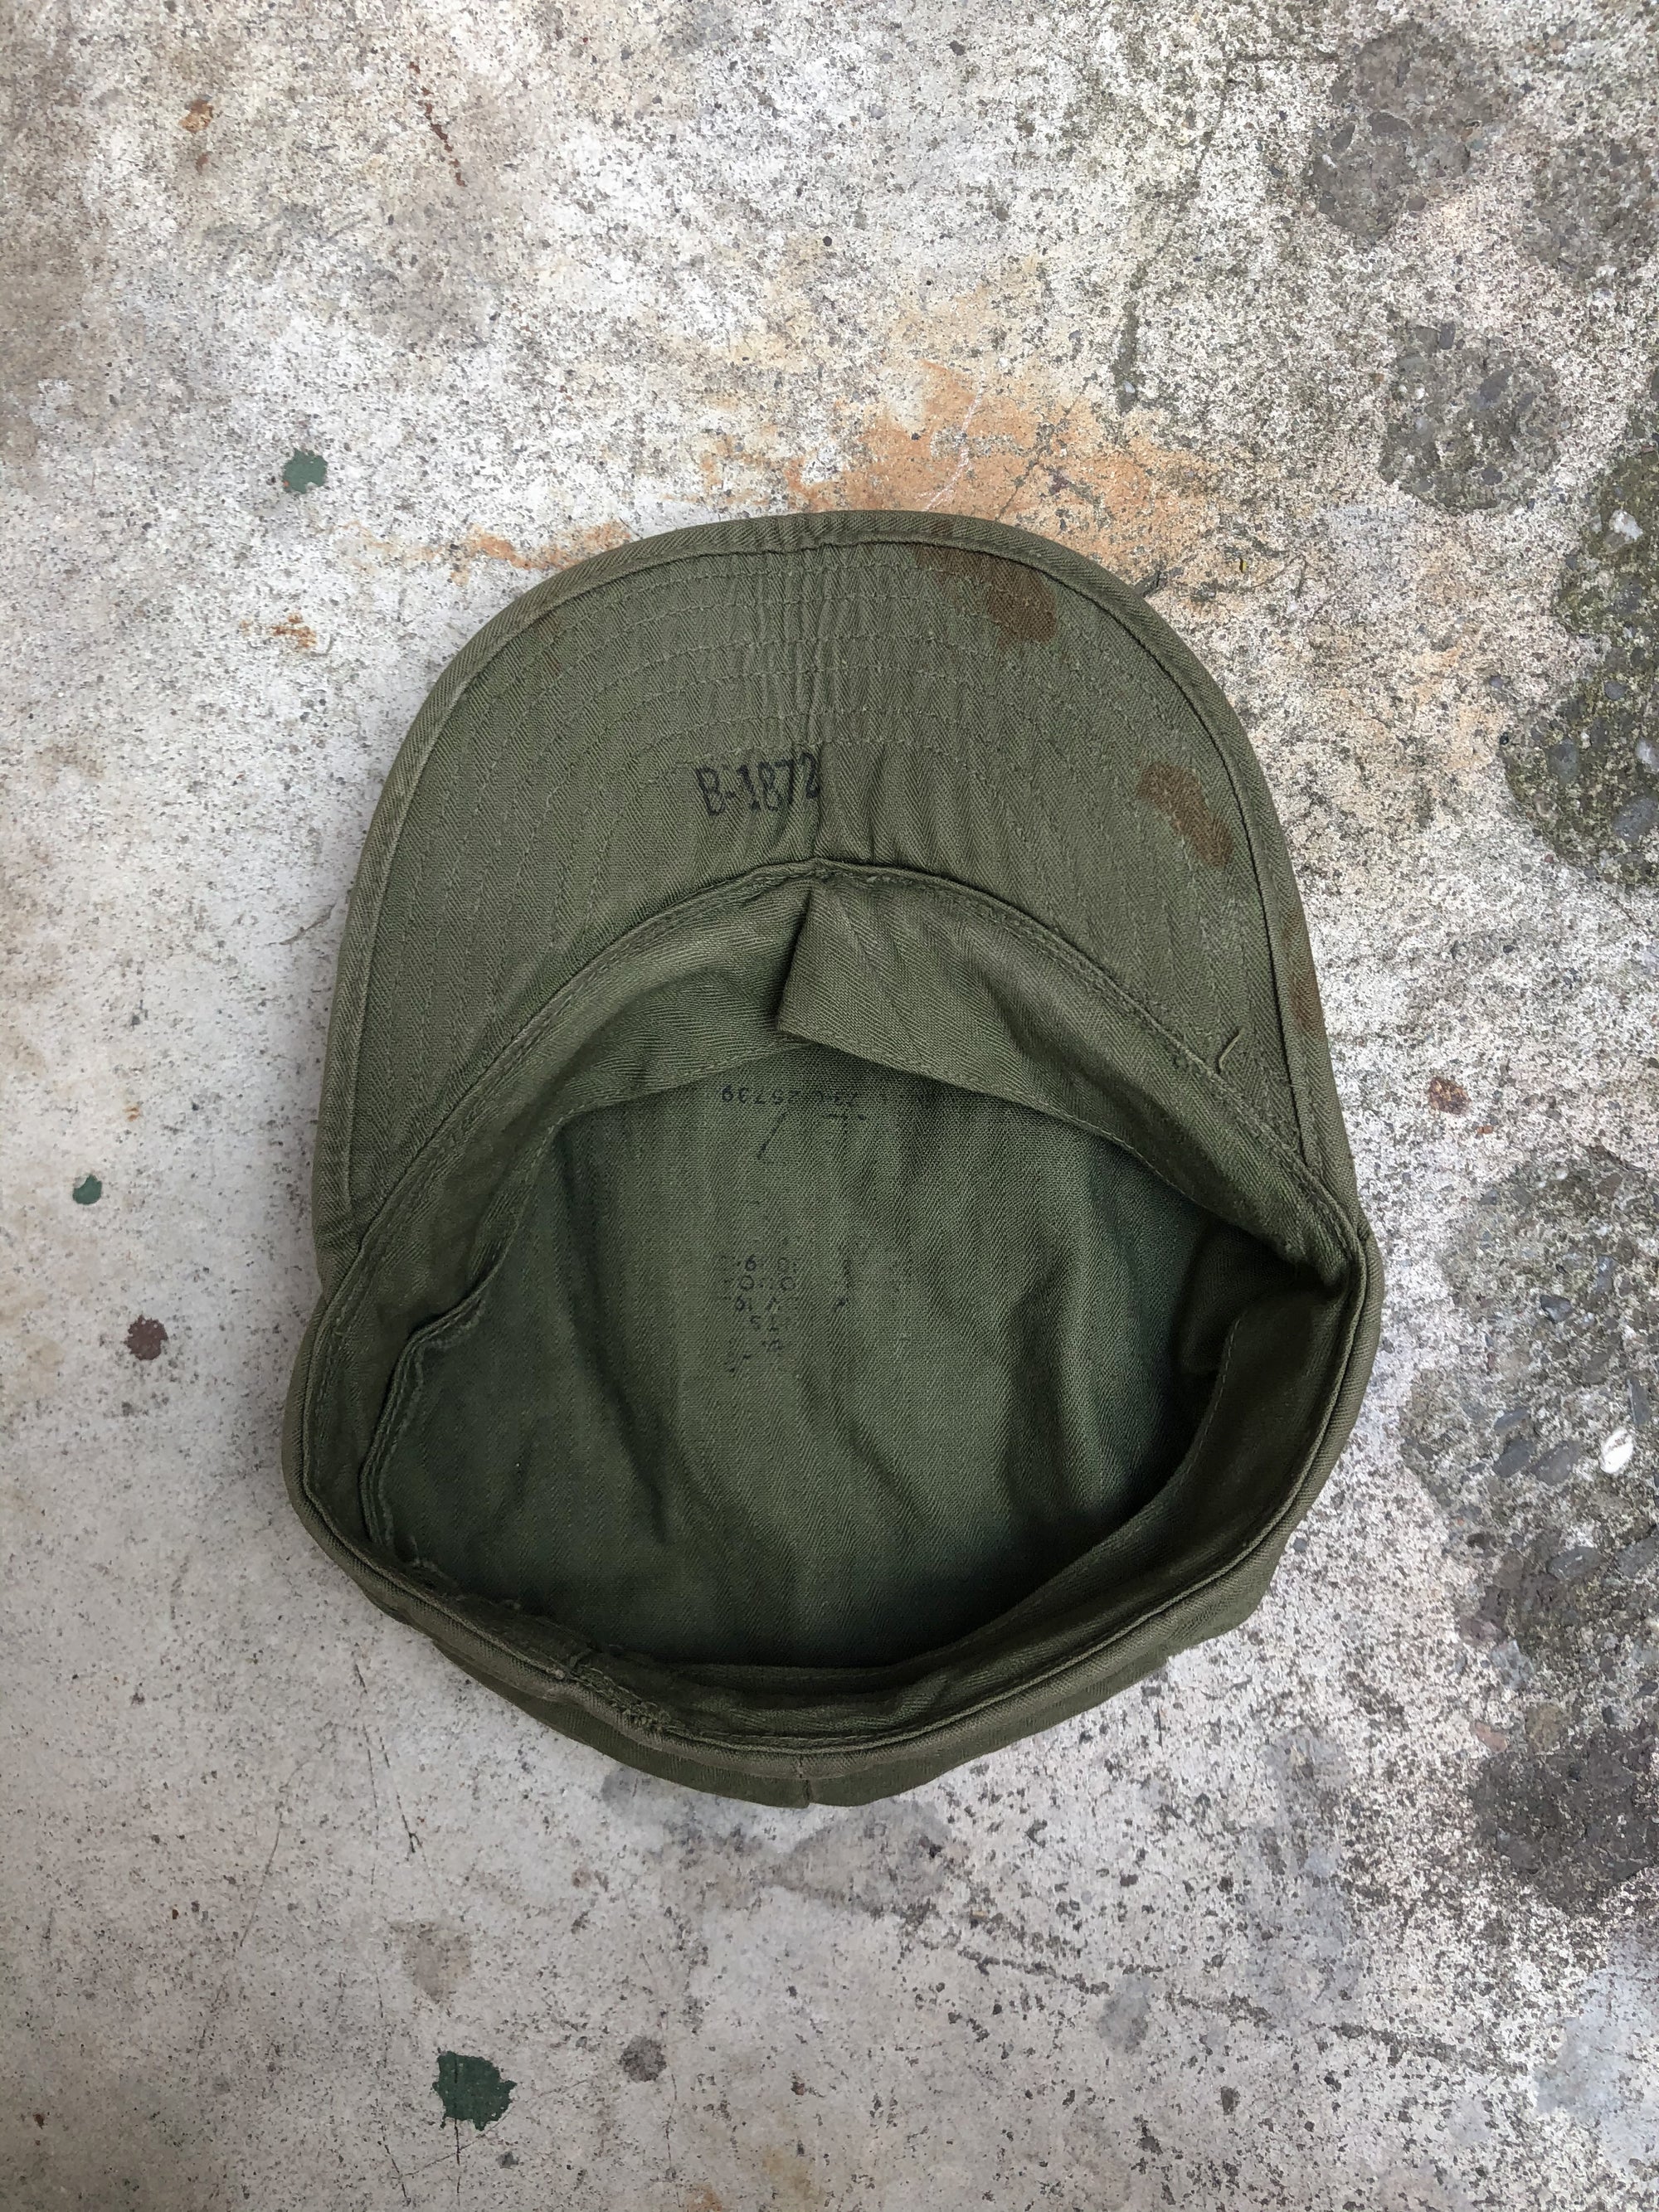 1950s Faded Green HBT Military Hat